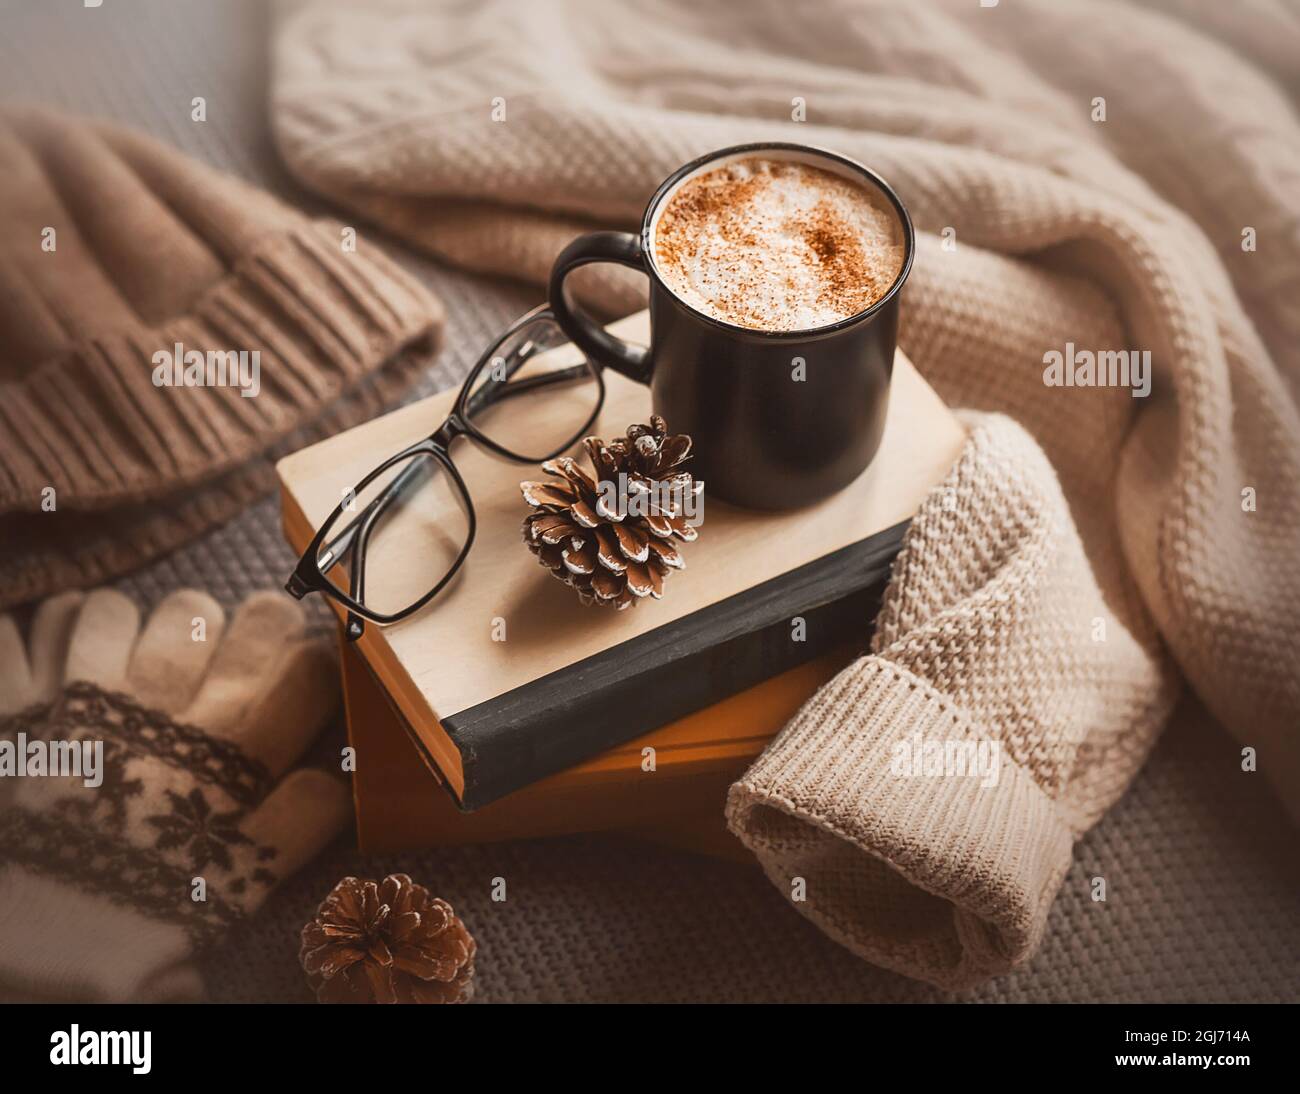 https://c8.alamy.com/comp/2GJ714A/winter-still-life-there-is-a-mug-of-coffee-with-cream-and-cinnamon-on-the-books-and-next-to-it-are-fir-cones-and-winter-warm-clothes-a-hat-glove-2GJ714A.jpg